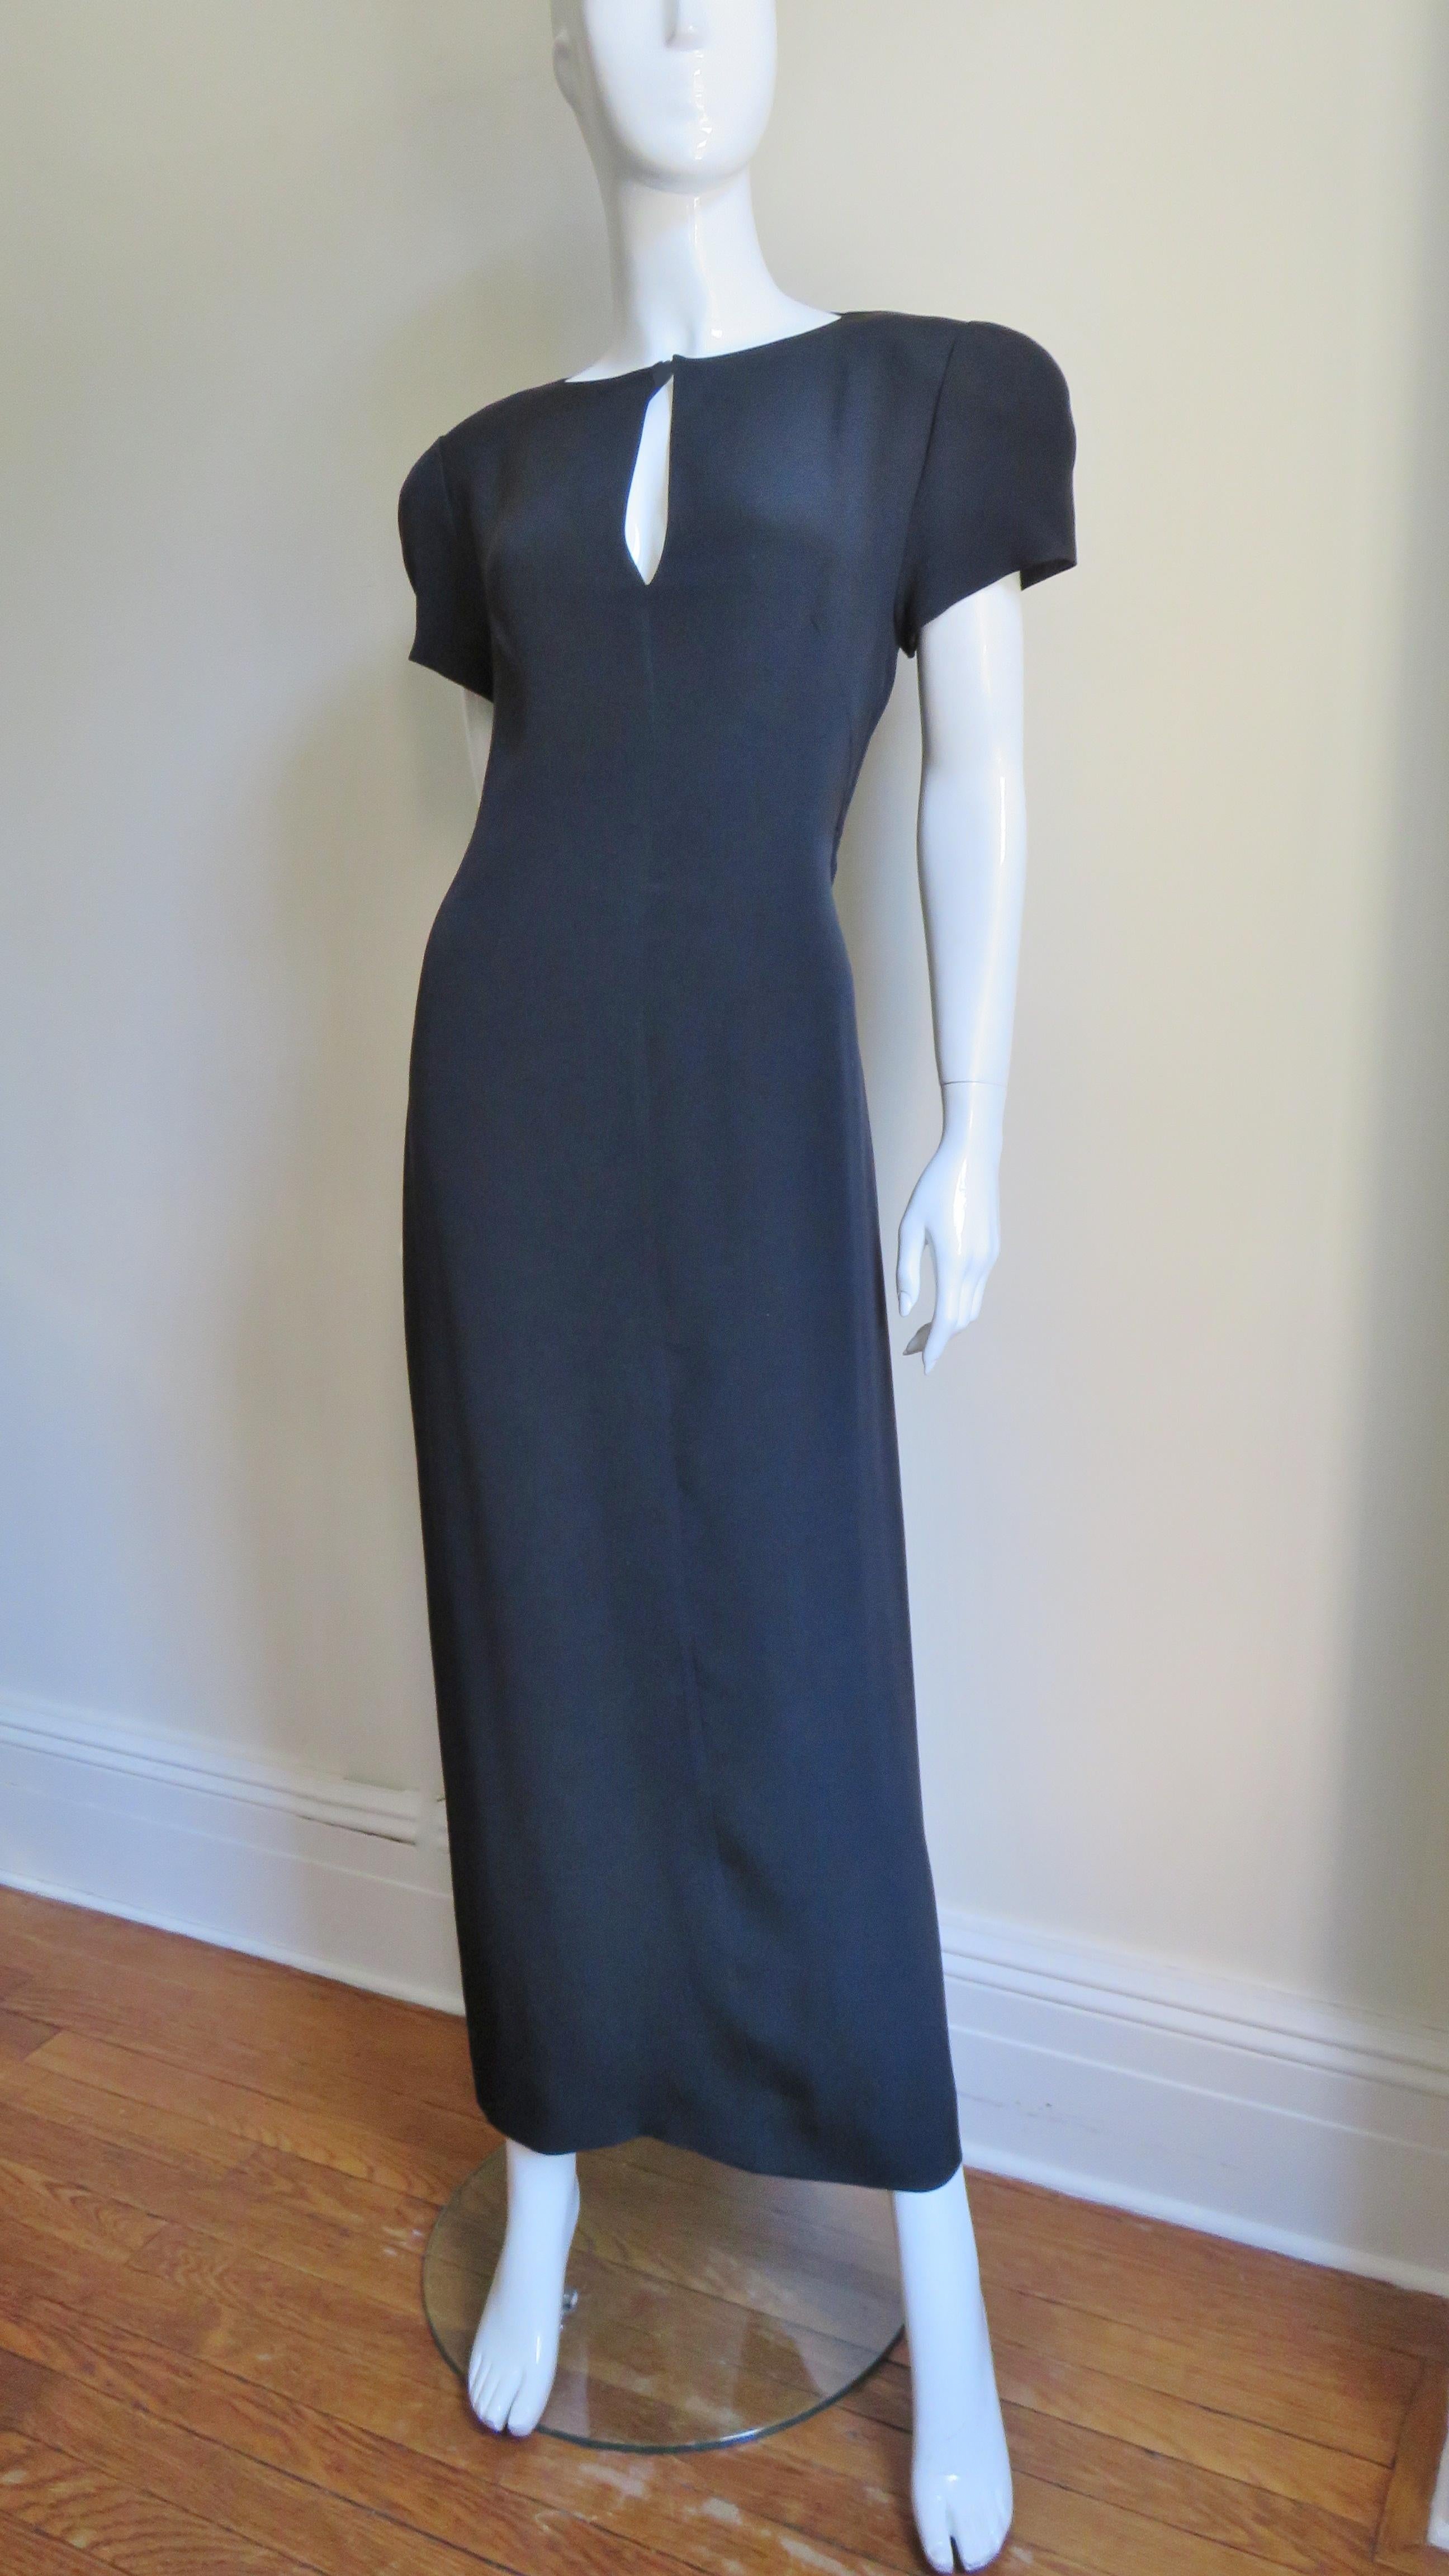 A great black silk dress from Krizia.  It has short sleeves and a front keyhole closing at the crew neck with a hidden button above it.  It skims the body then falls straight to the hem.  There is a dramatic slash diagonally across the upper back